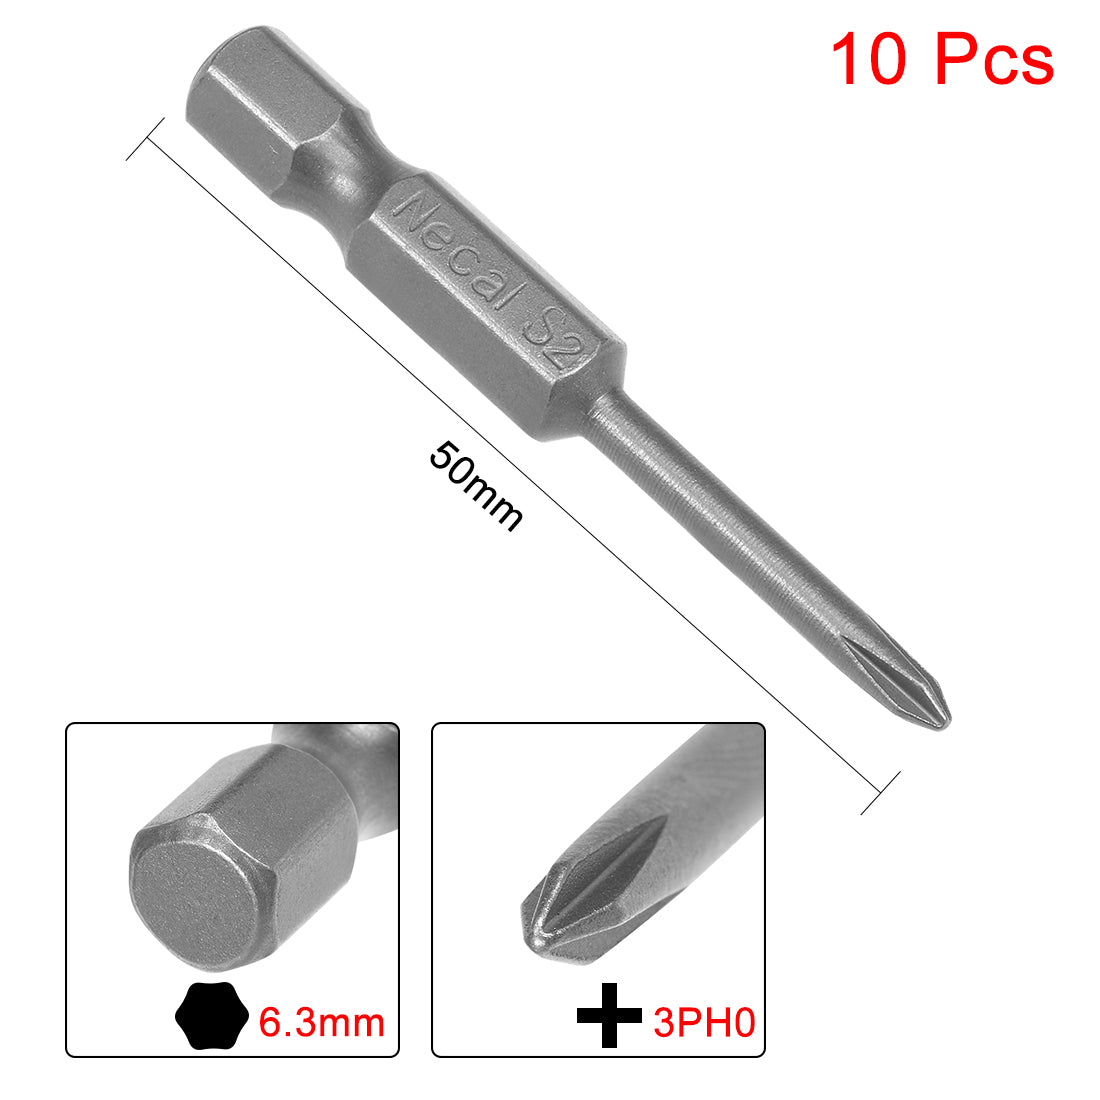 Uxcell Uxcell 10pcs 50mm 1/4" Hex Shank 4mm Magnetic Phillips Head Screwdriver Bits S2